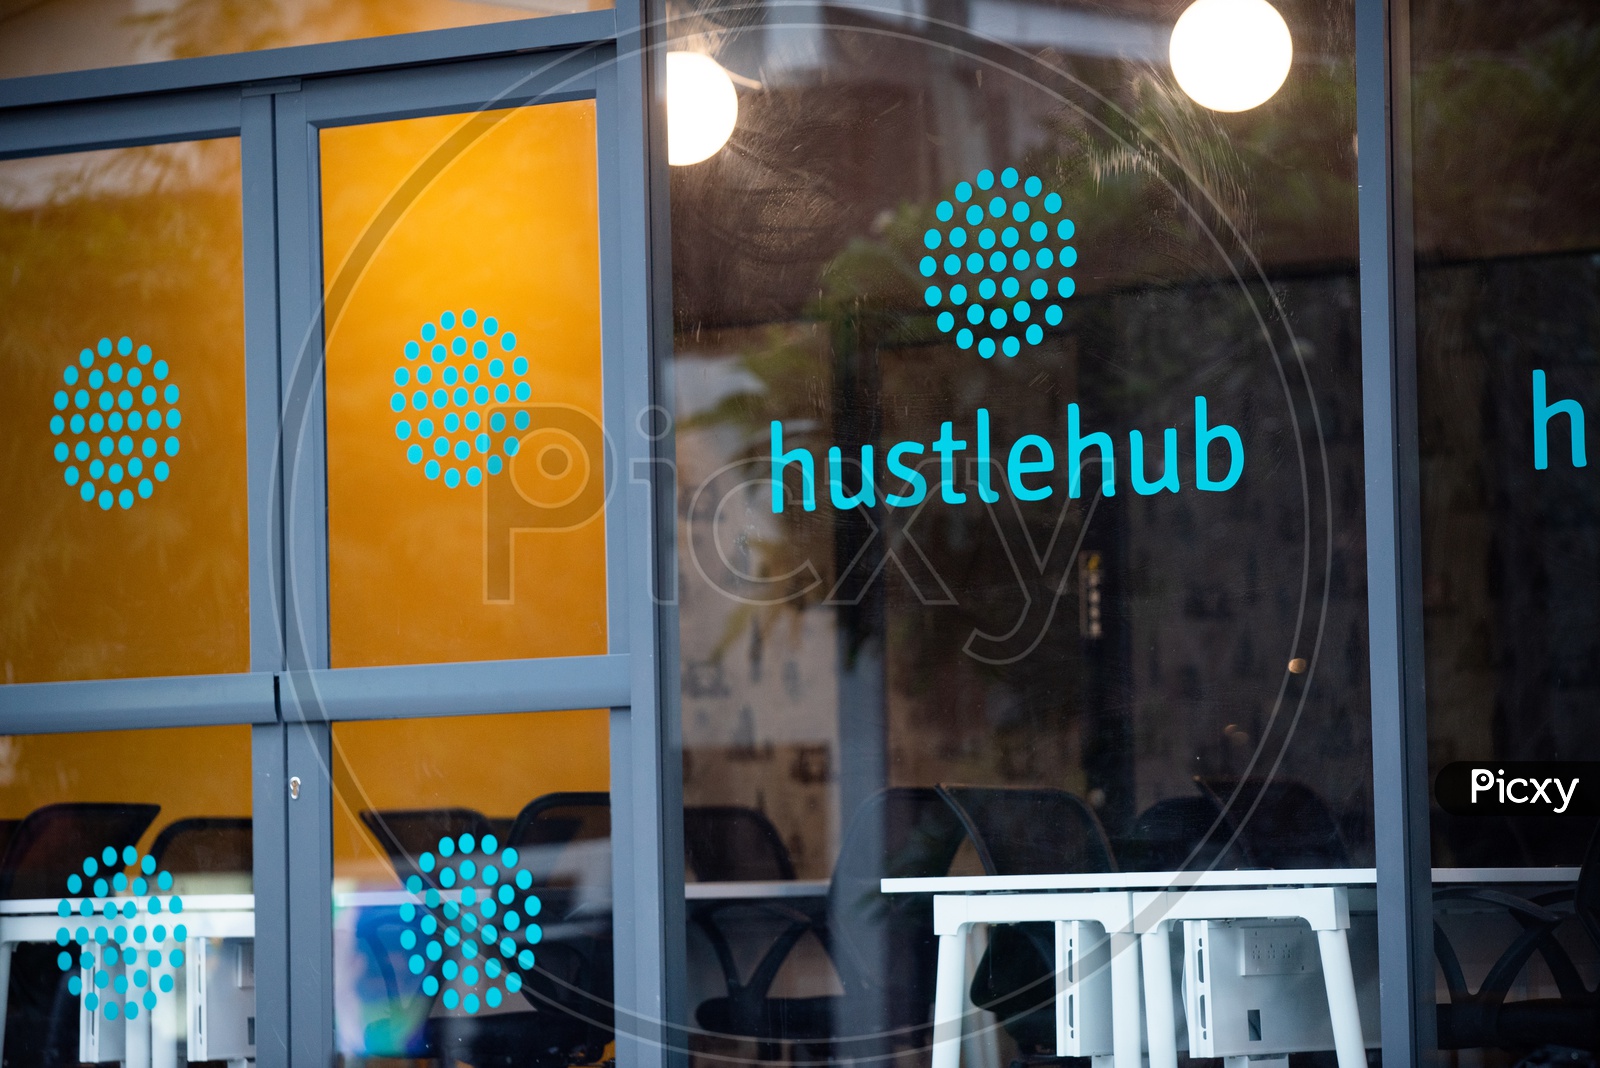 Hustlehub Co-Working Spaces,Offices in Bangalore